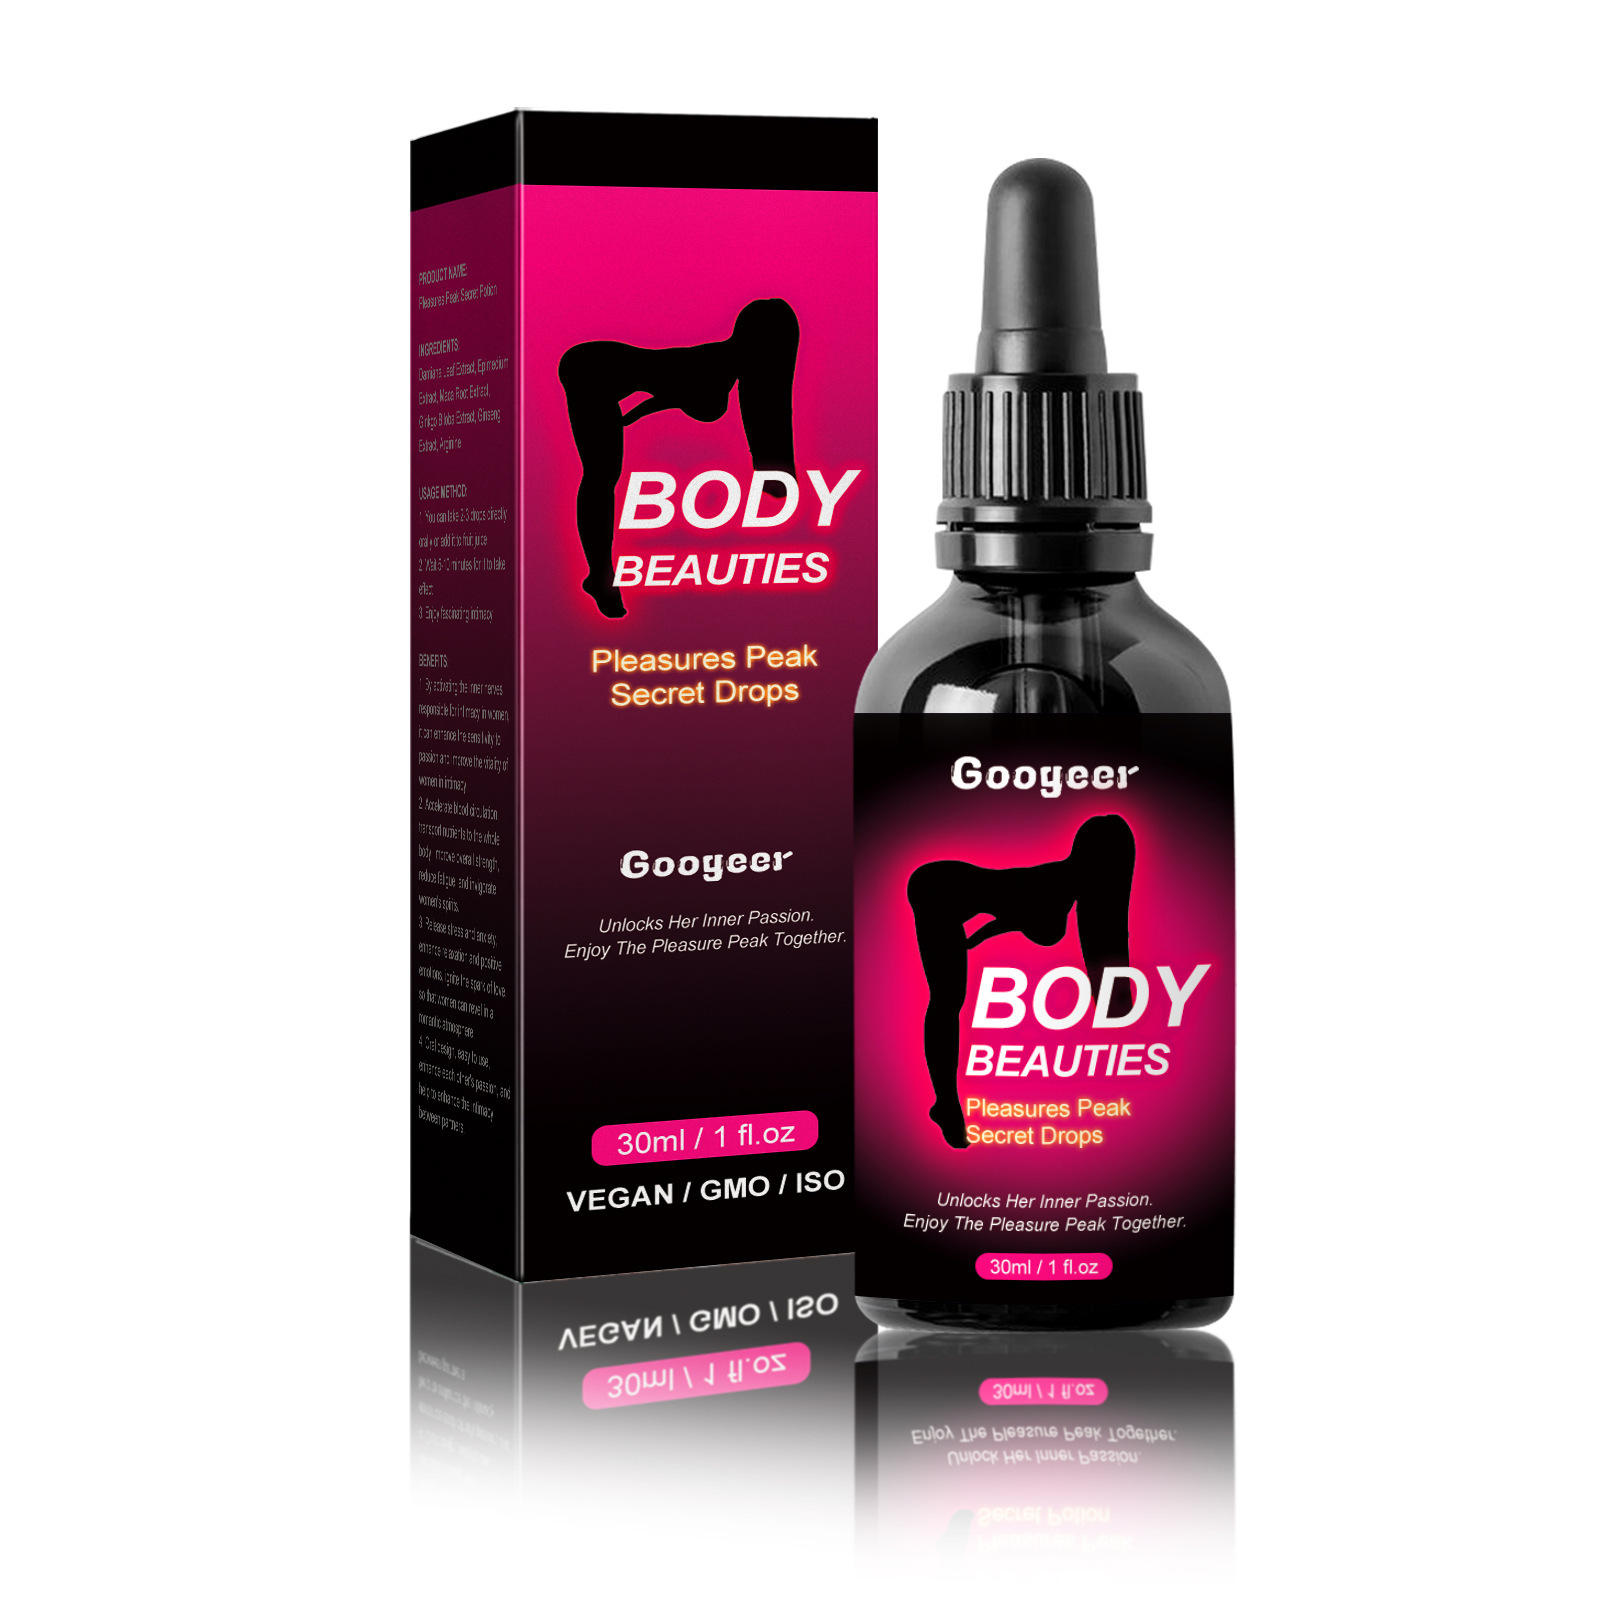 Googeer Female Care Drops